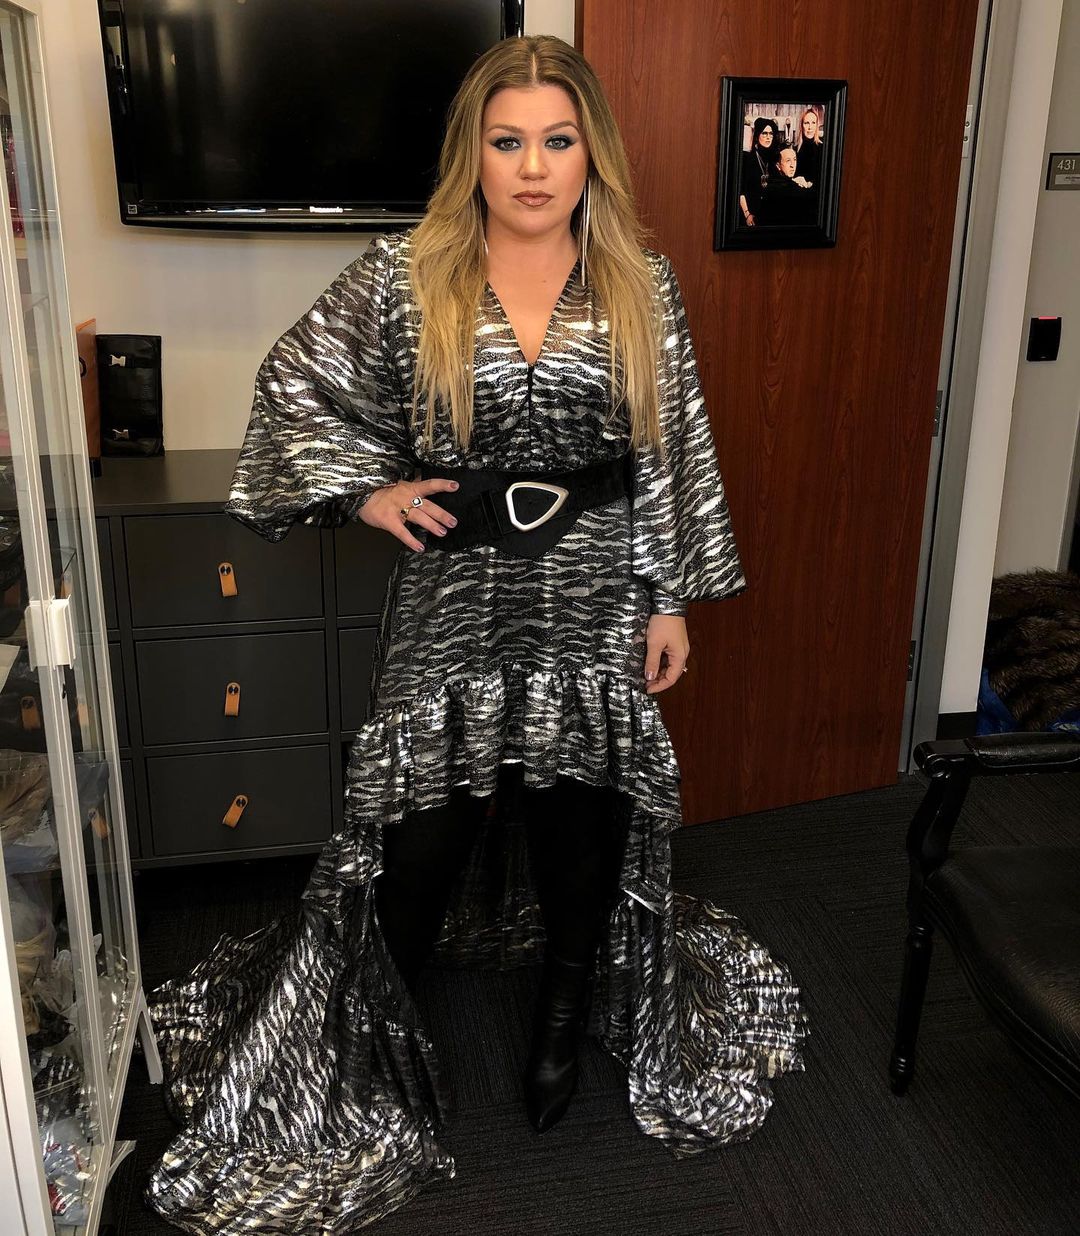 An amazing photo of Kelly Clarkson in a black and white design dress with a belly belt and boots to match.